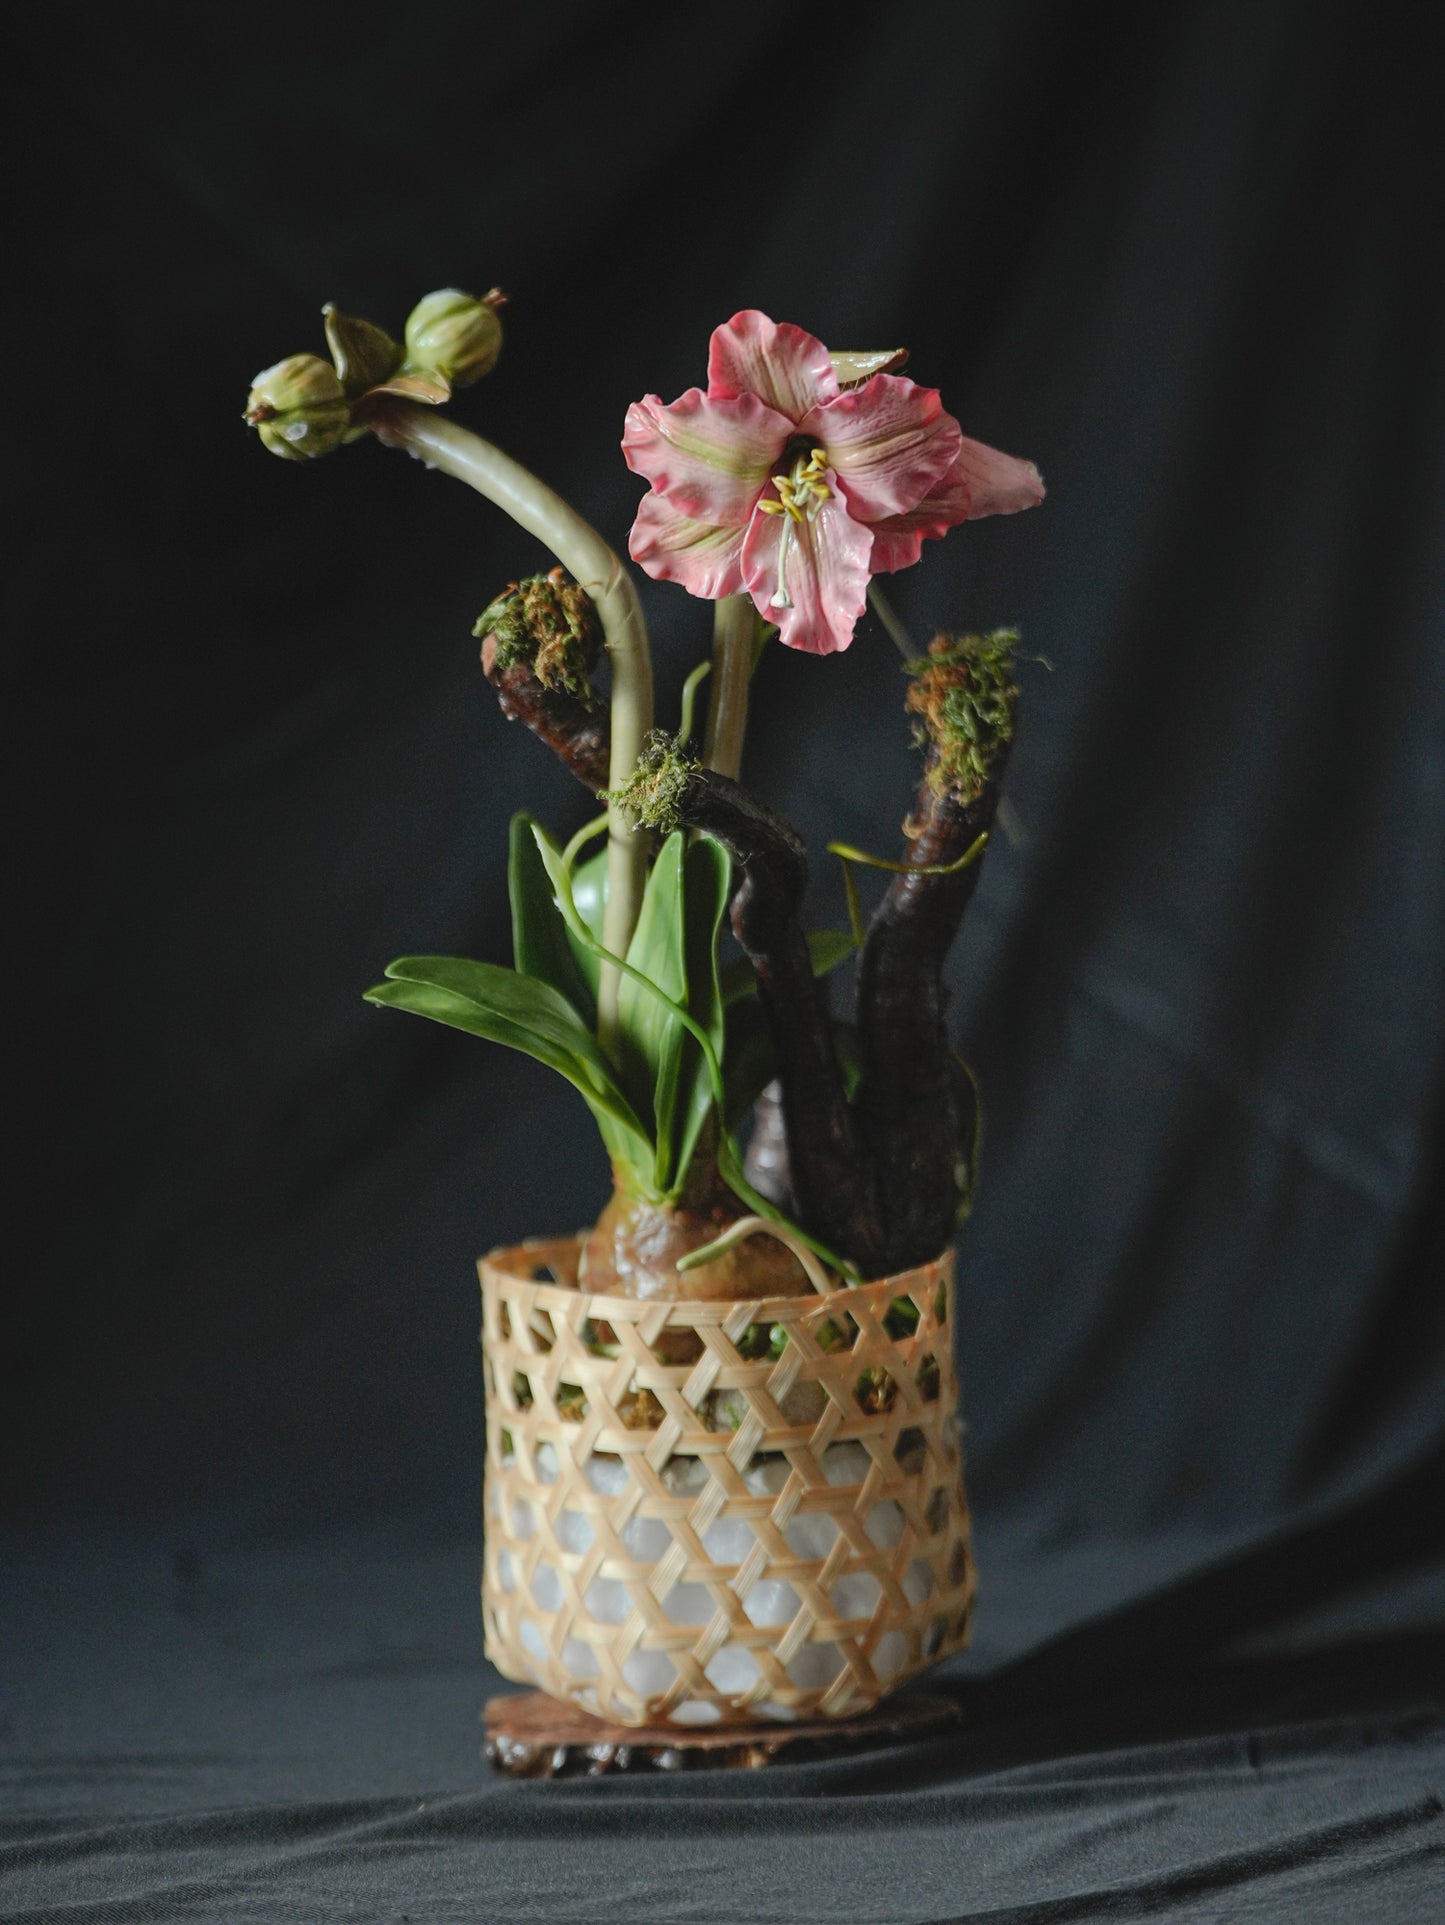 Himalayan Lily Flower With A Bamboo Planter